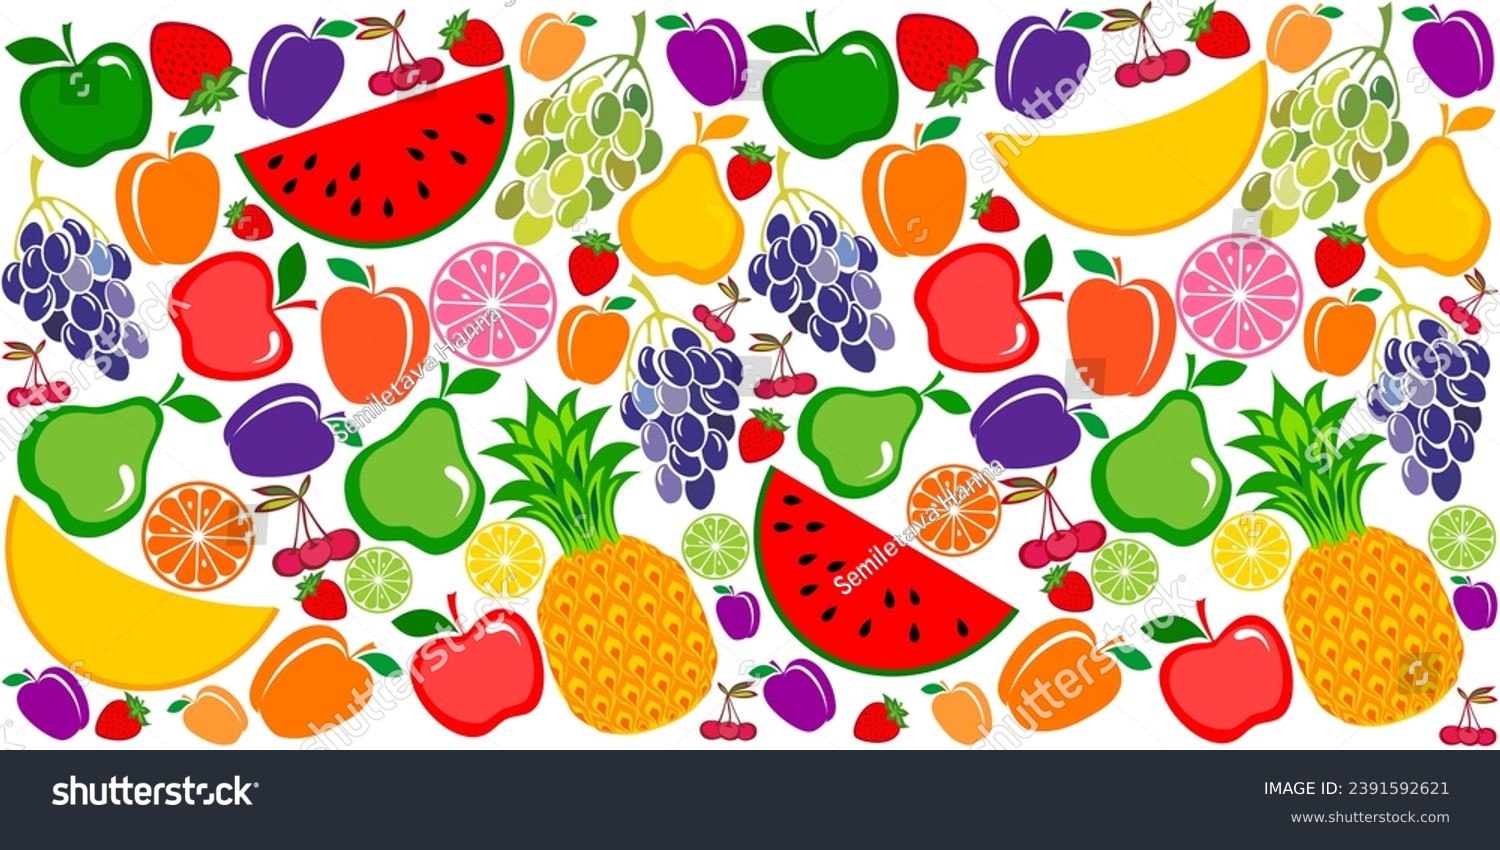 Fruits seamless pattern. Background of fresh falling mixed fruits isolated on white background. Healthy food. Top view, flat layout. Good for textile fabric design, wrapping paper, website wallpapers #2391592621